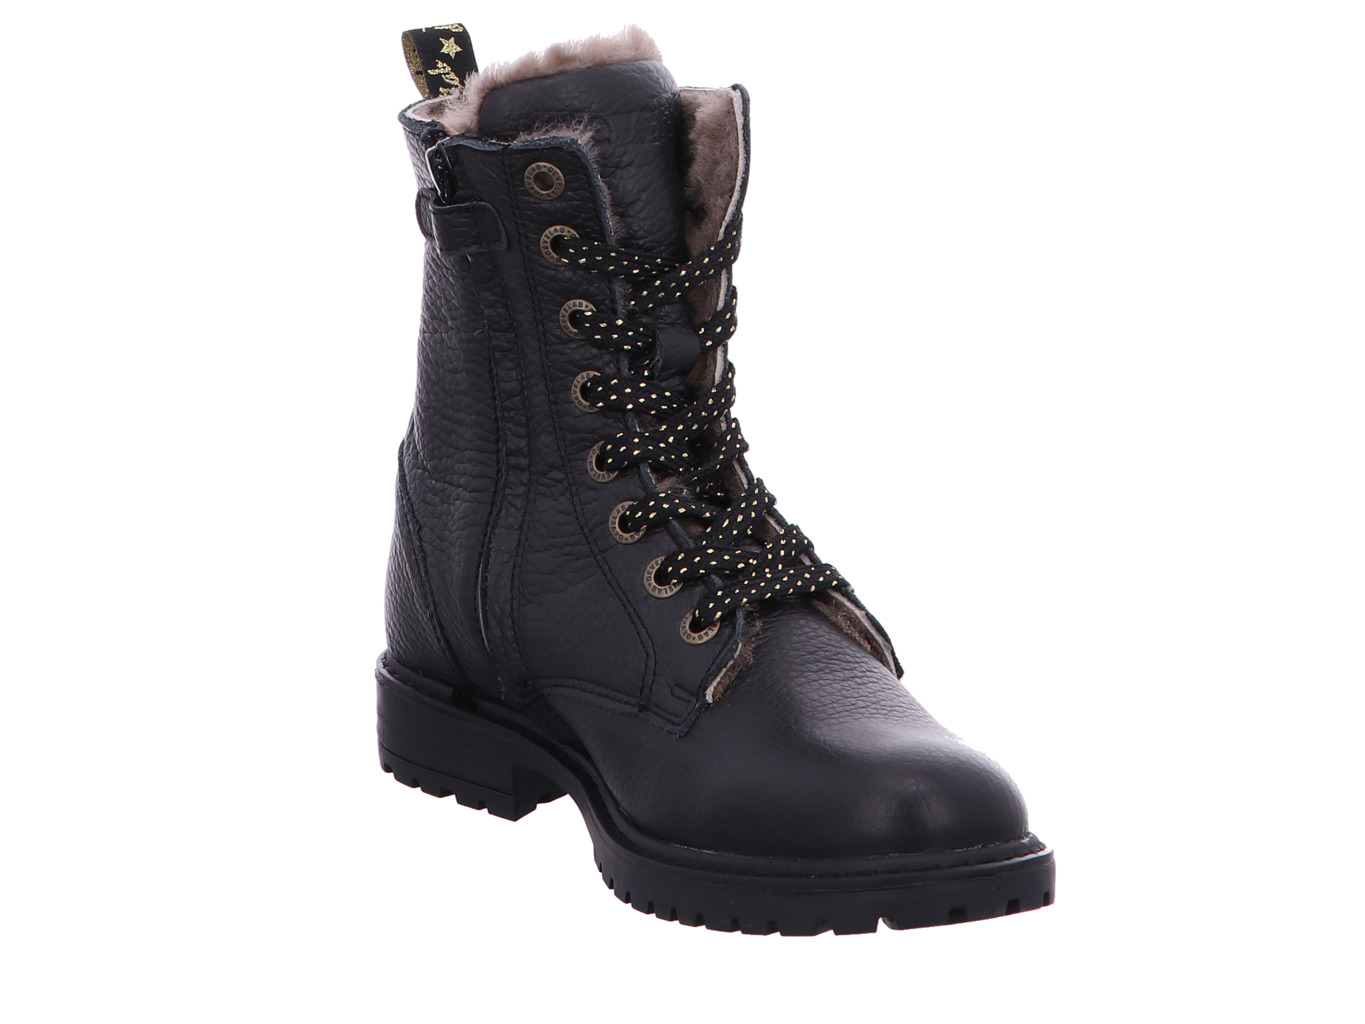 develab_girls_mid_boot_laces_42846_922_6140